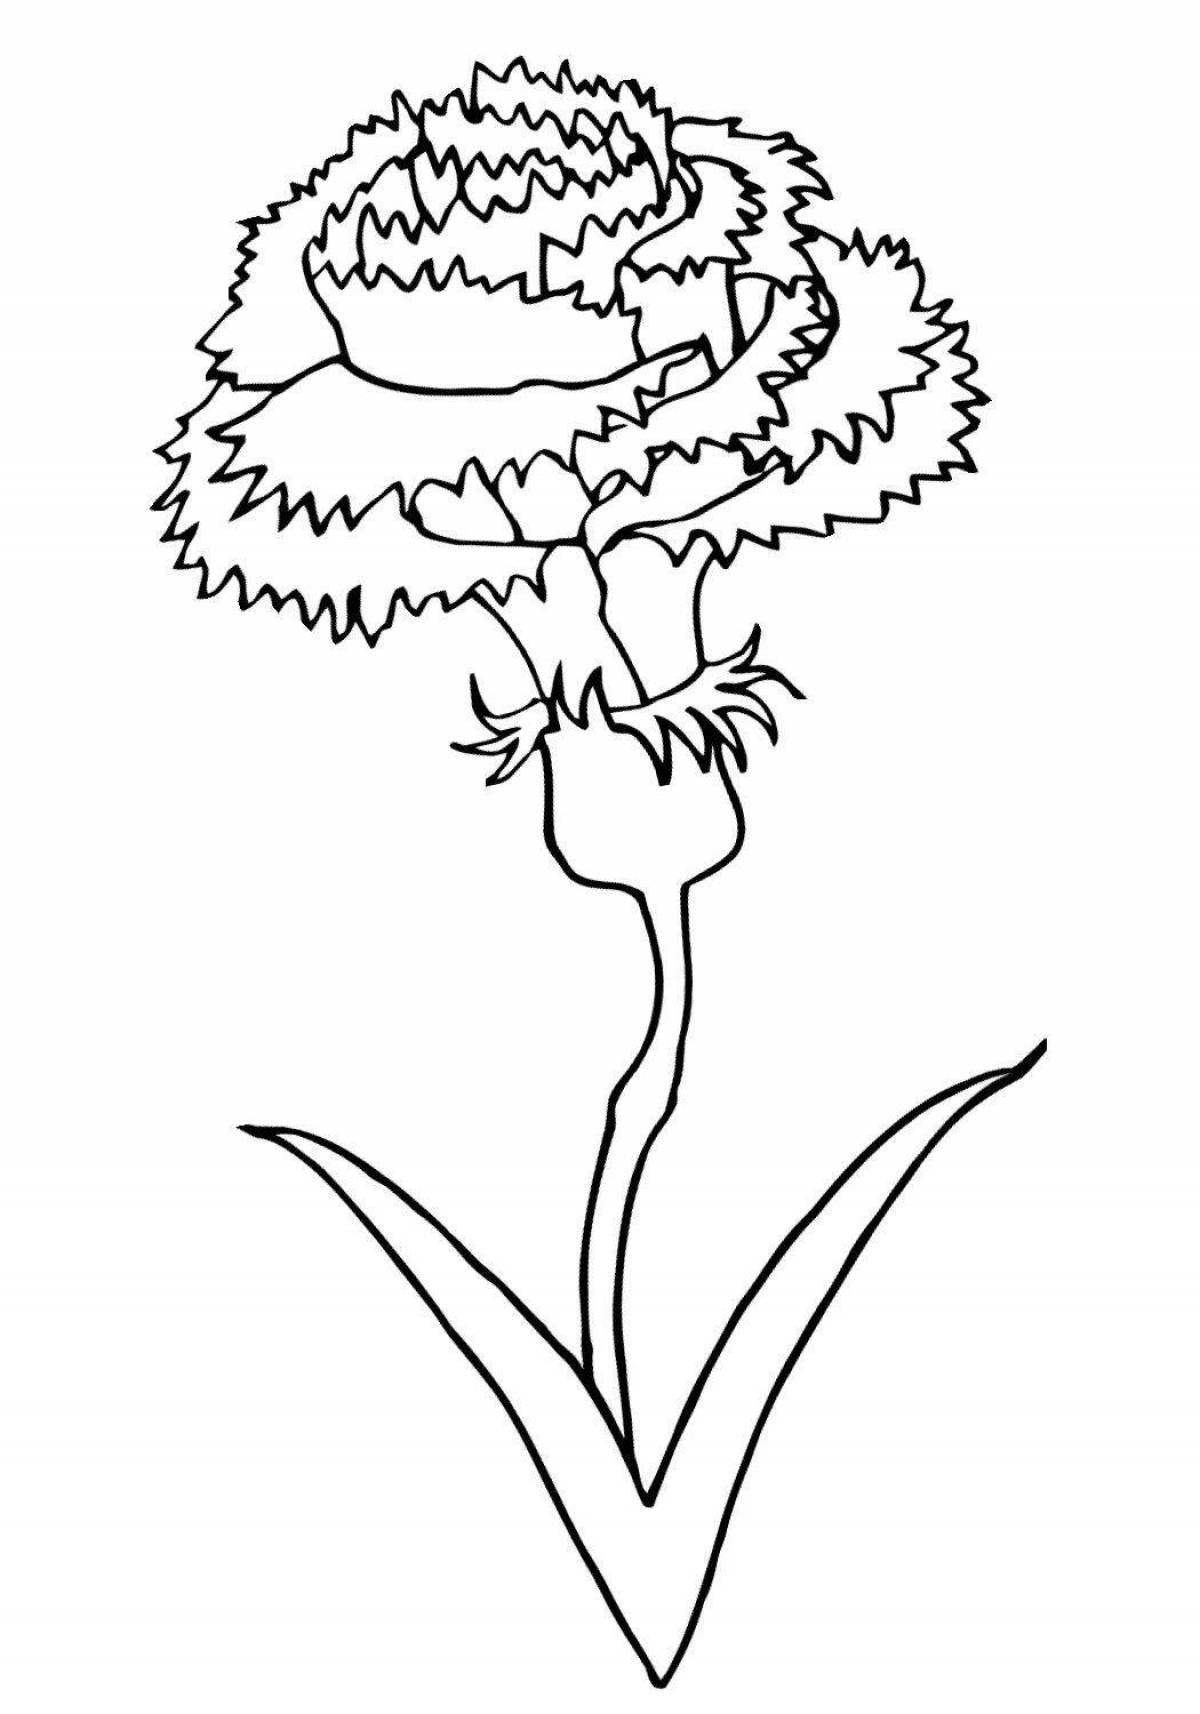 Great carnation coloring book for kids